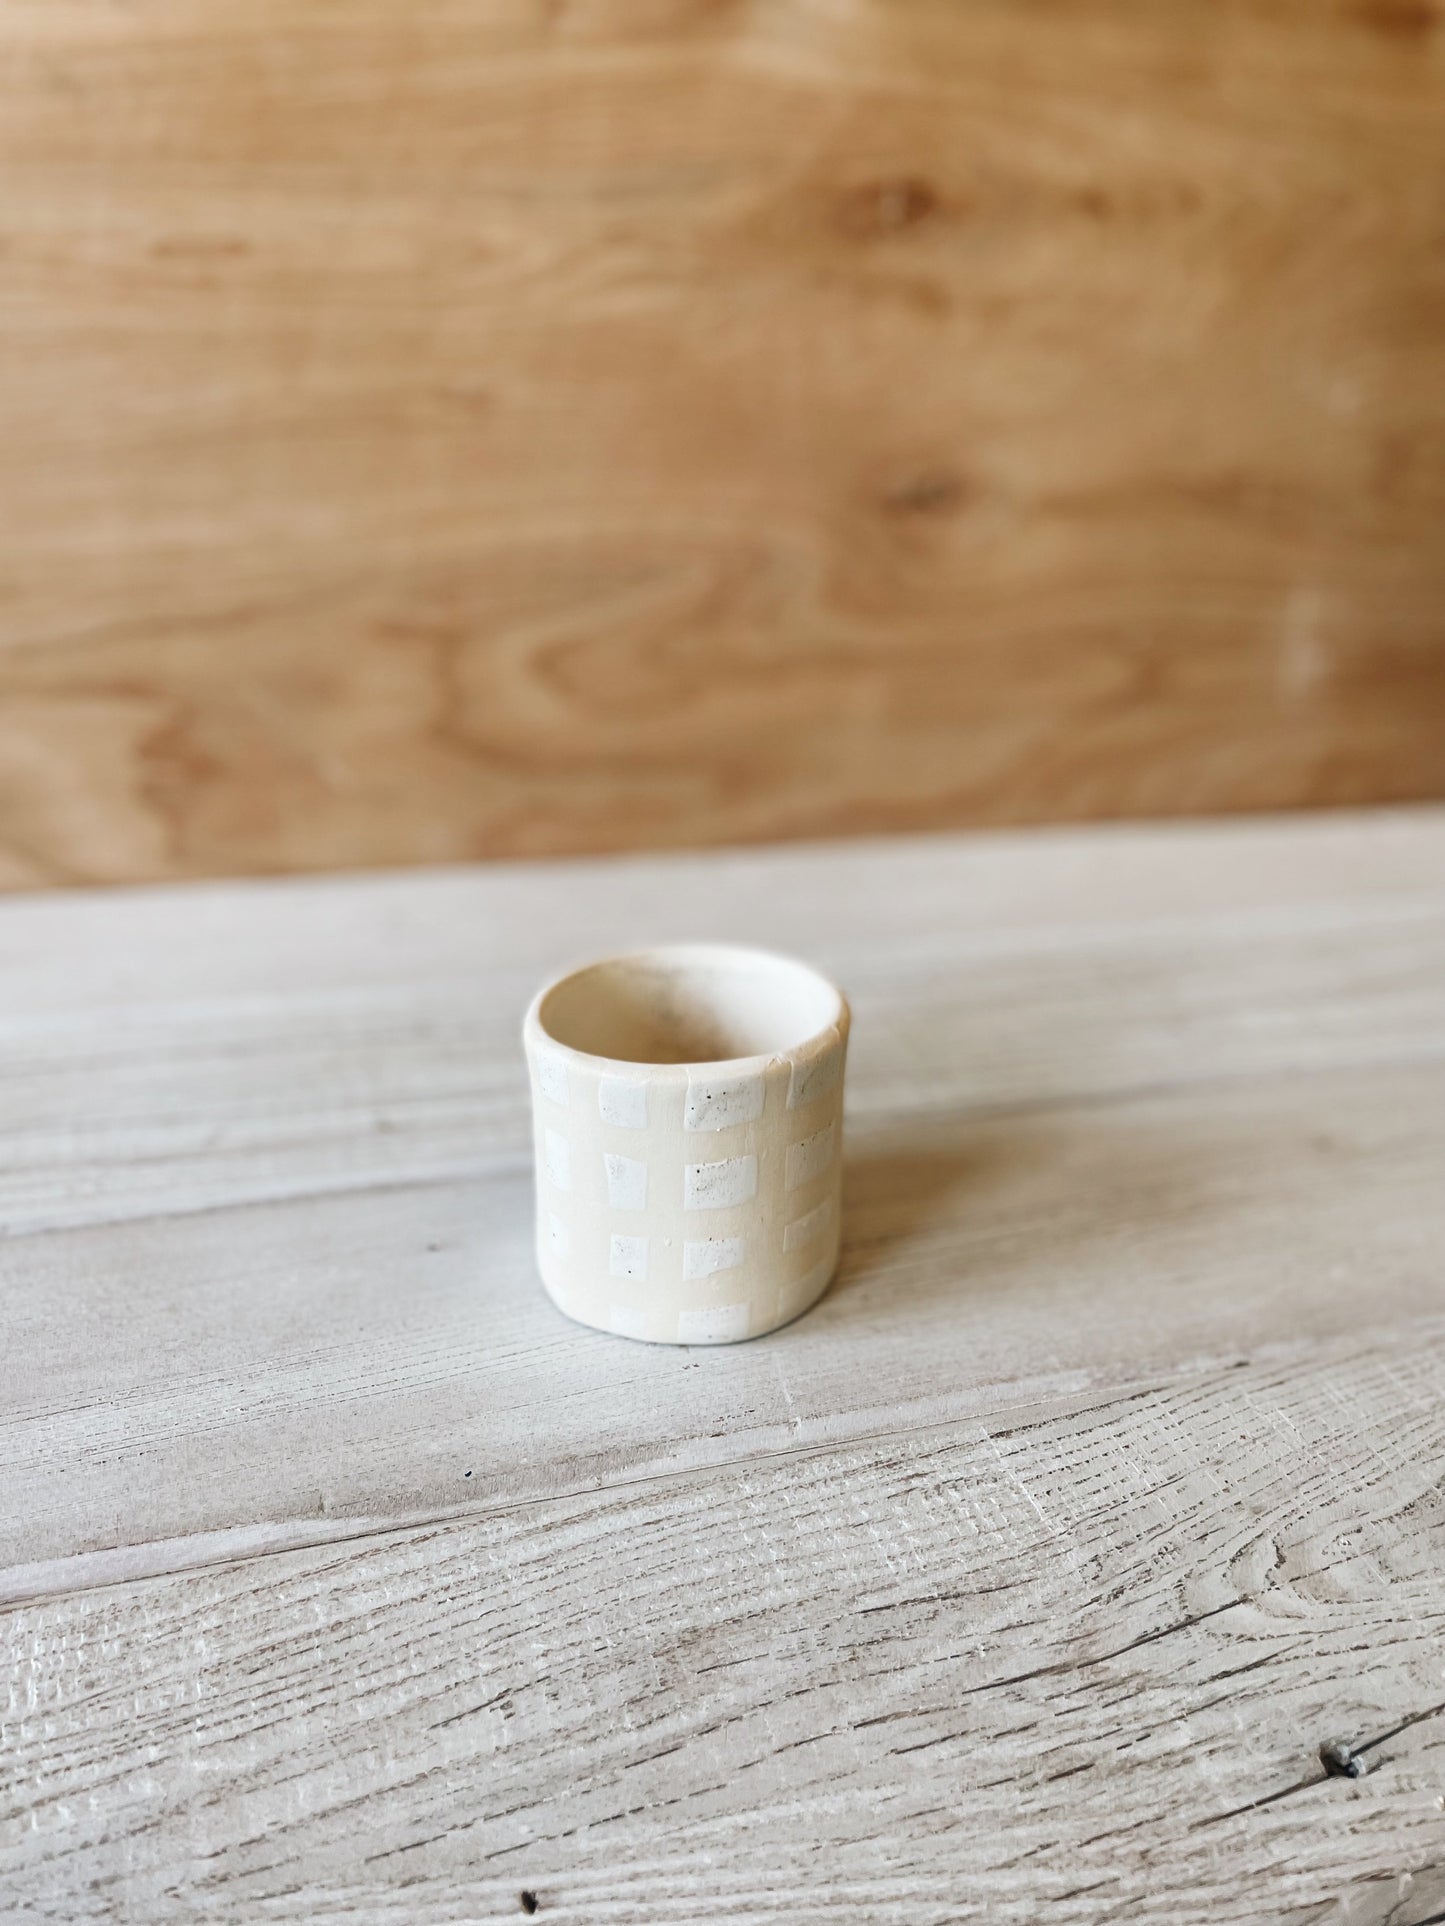 Checkered ceramic cup on wood background.